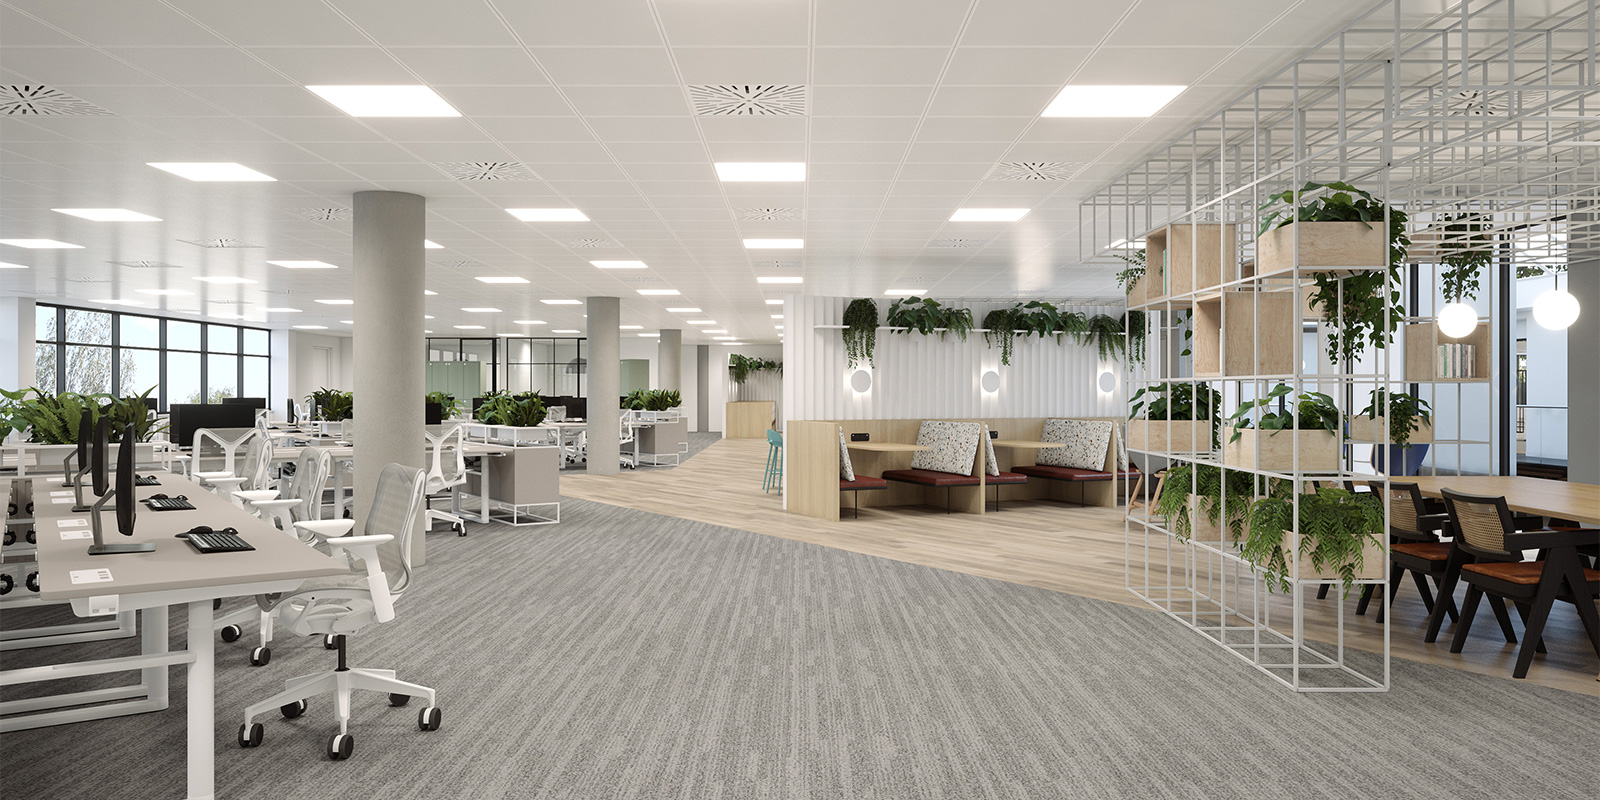 Indicative fit out image